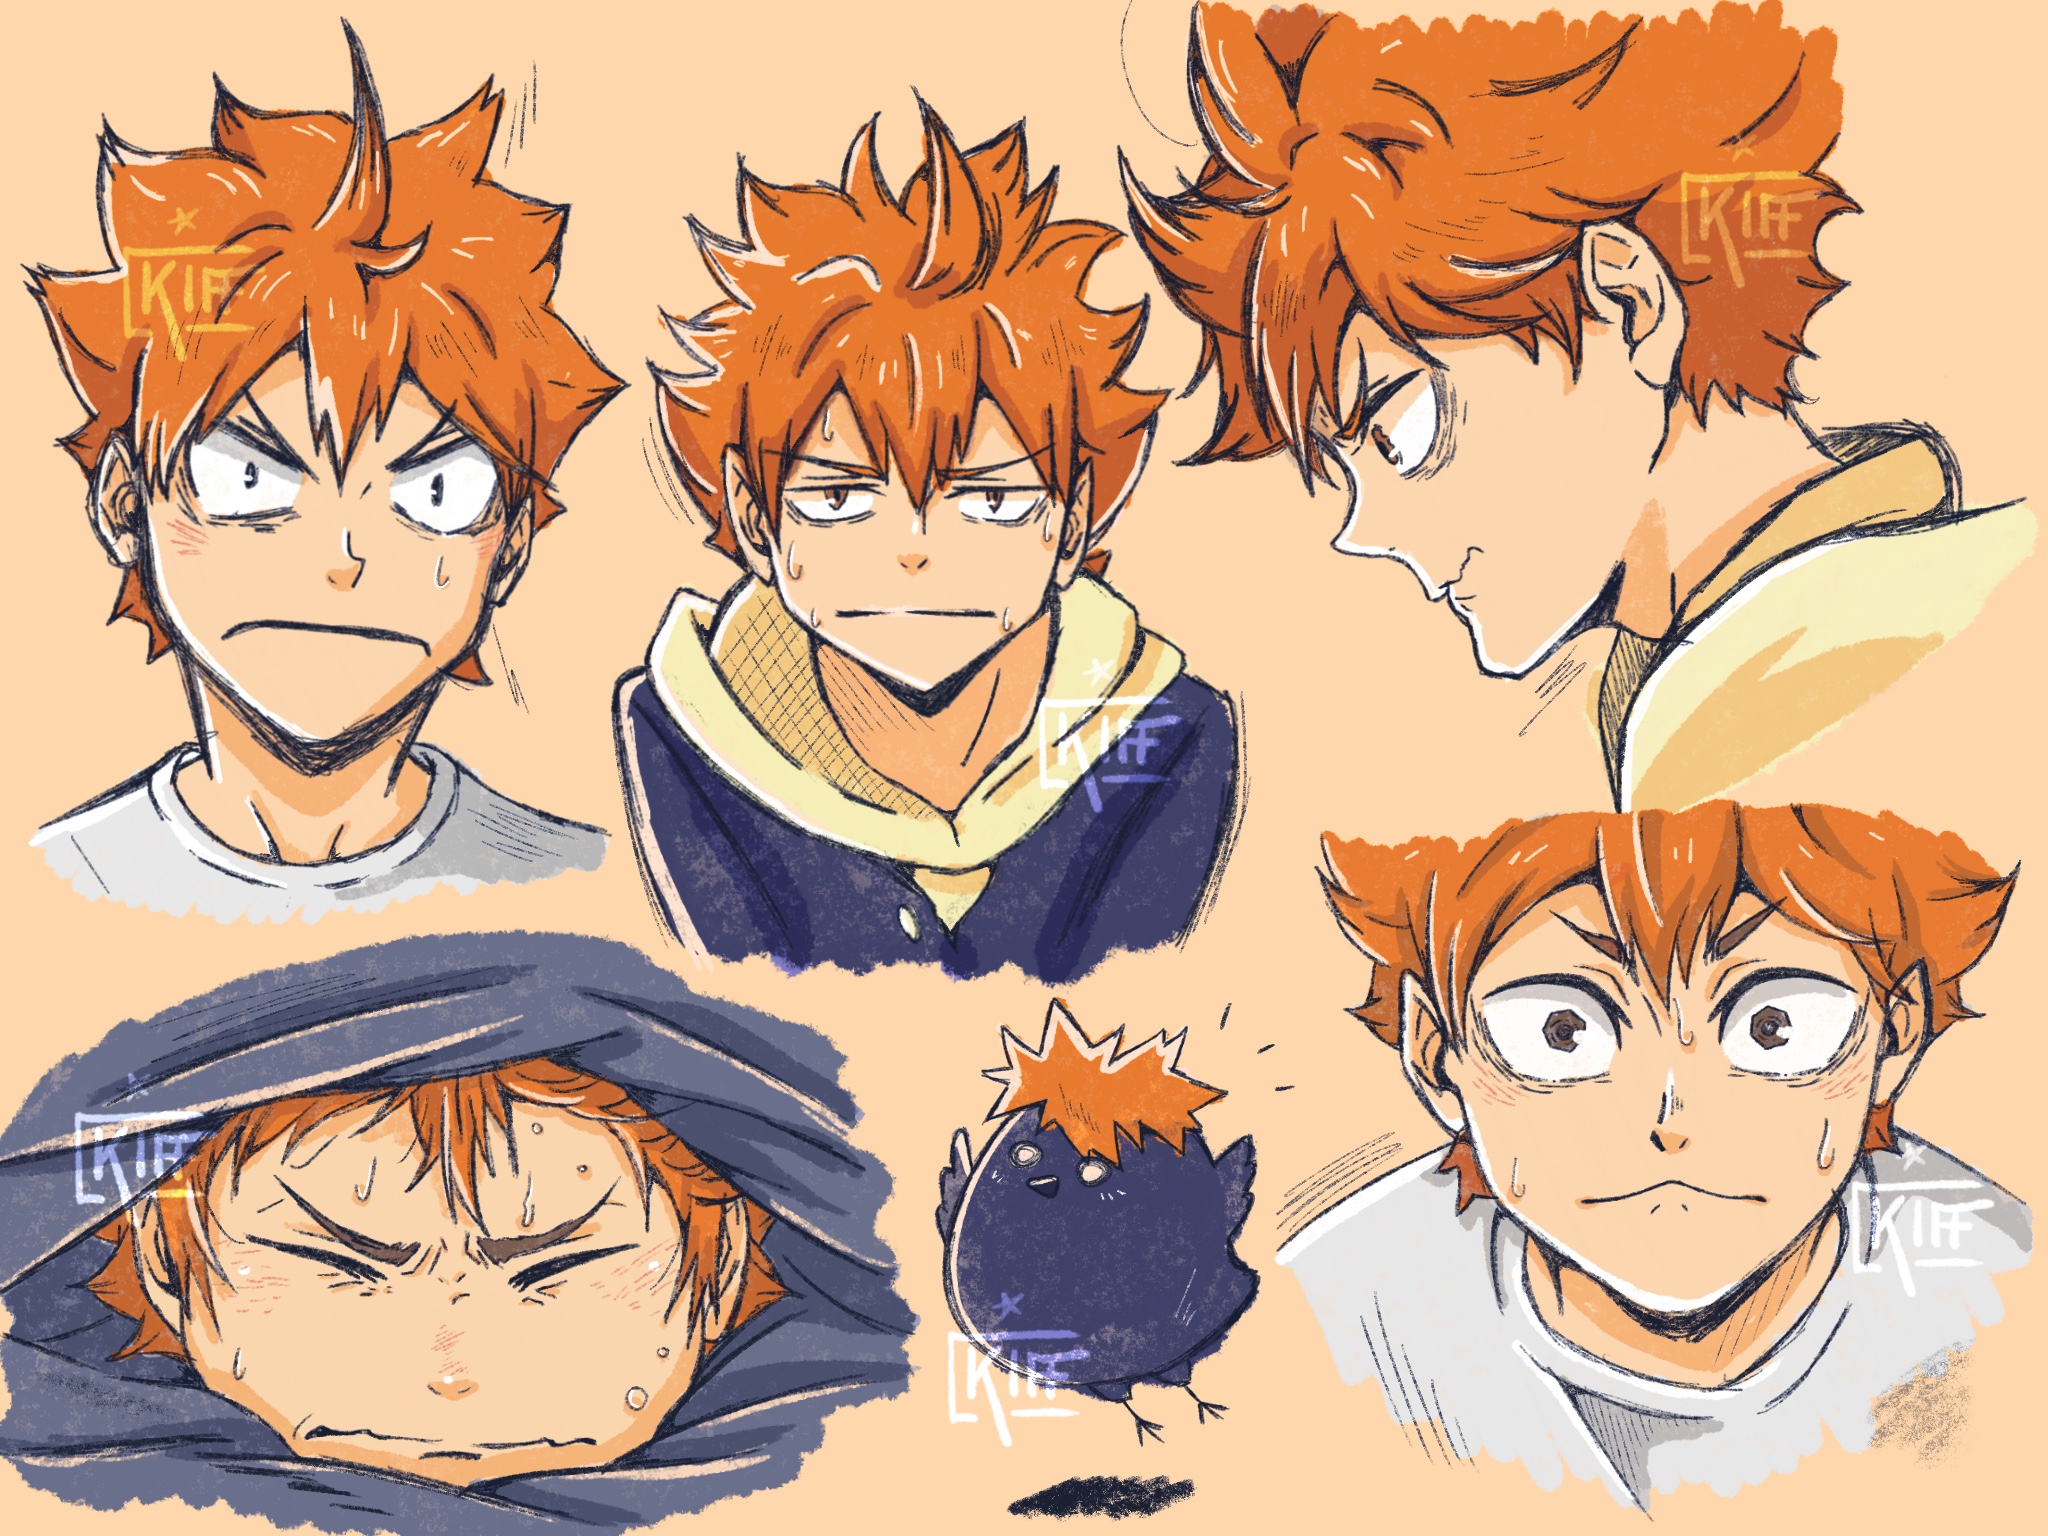 K i f f on X: Quick warm ups of Hinata from last ep🏐As always I